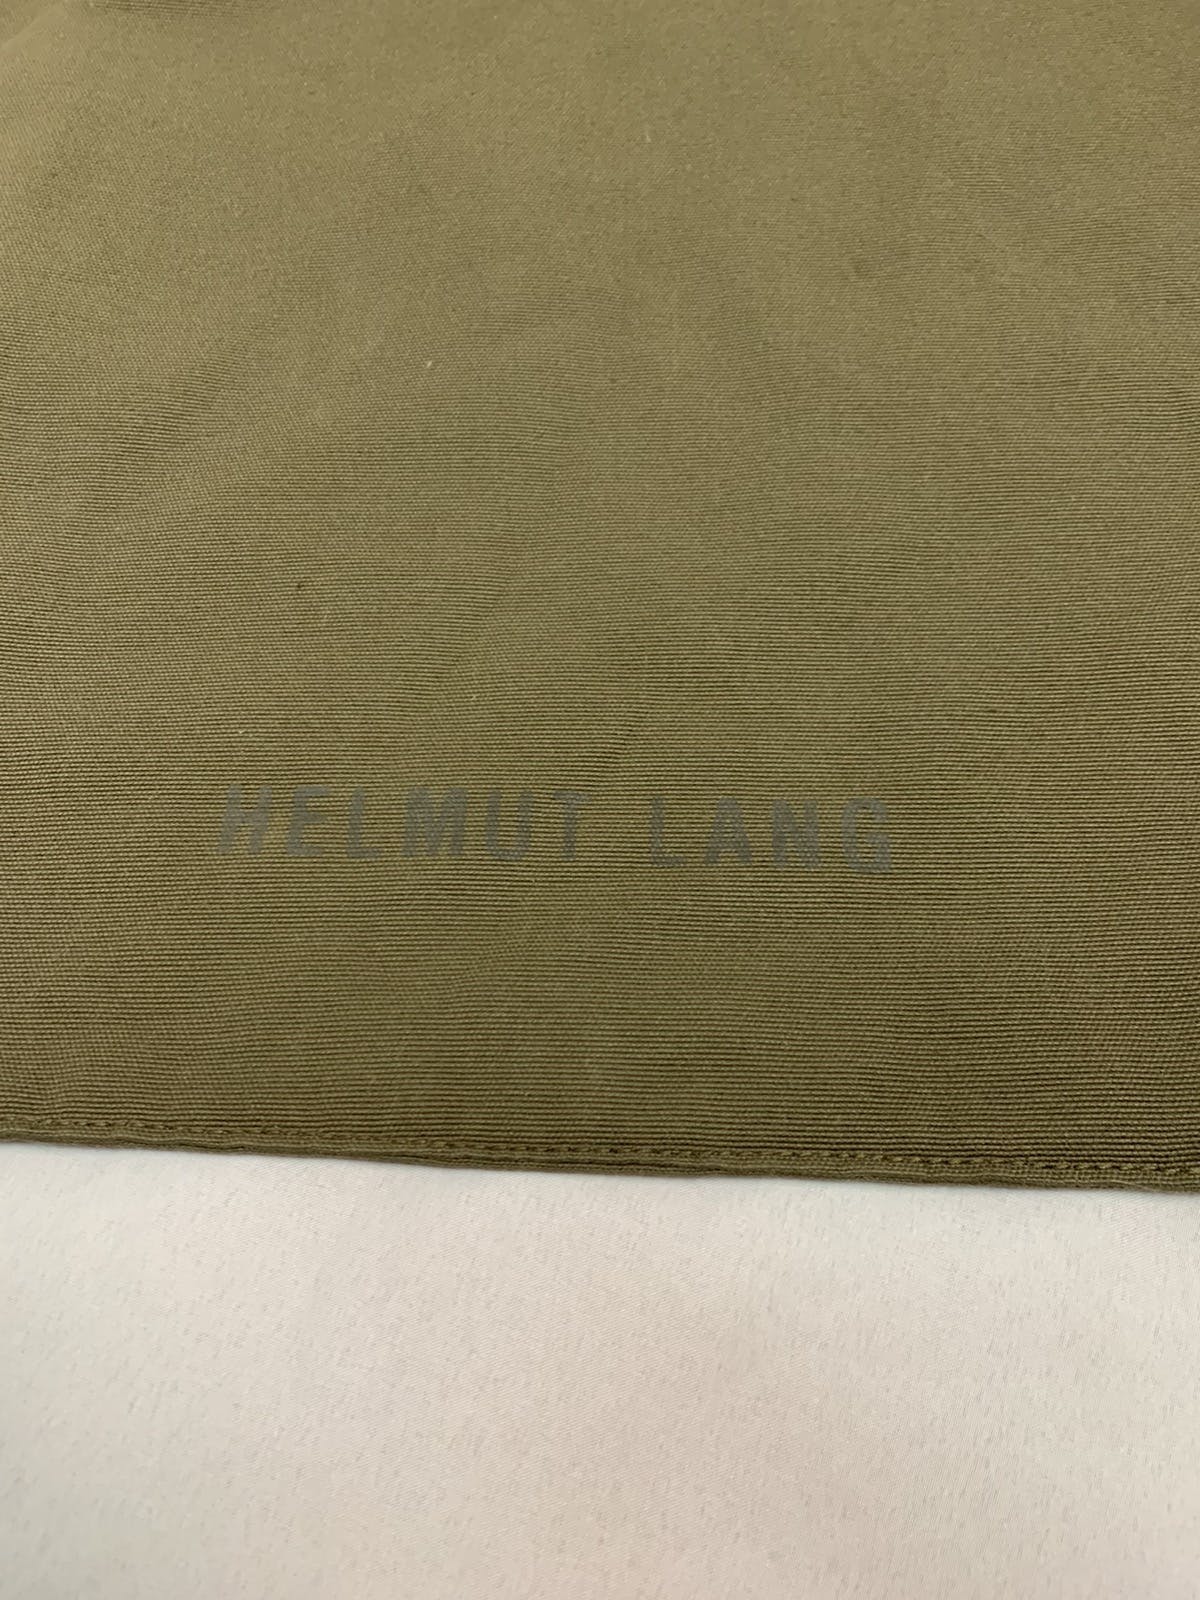 AW99 HELMUT LANG canvas military long tote bag - 5